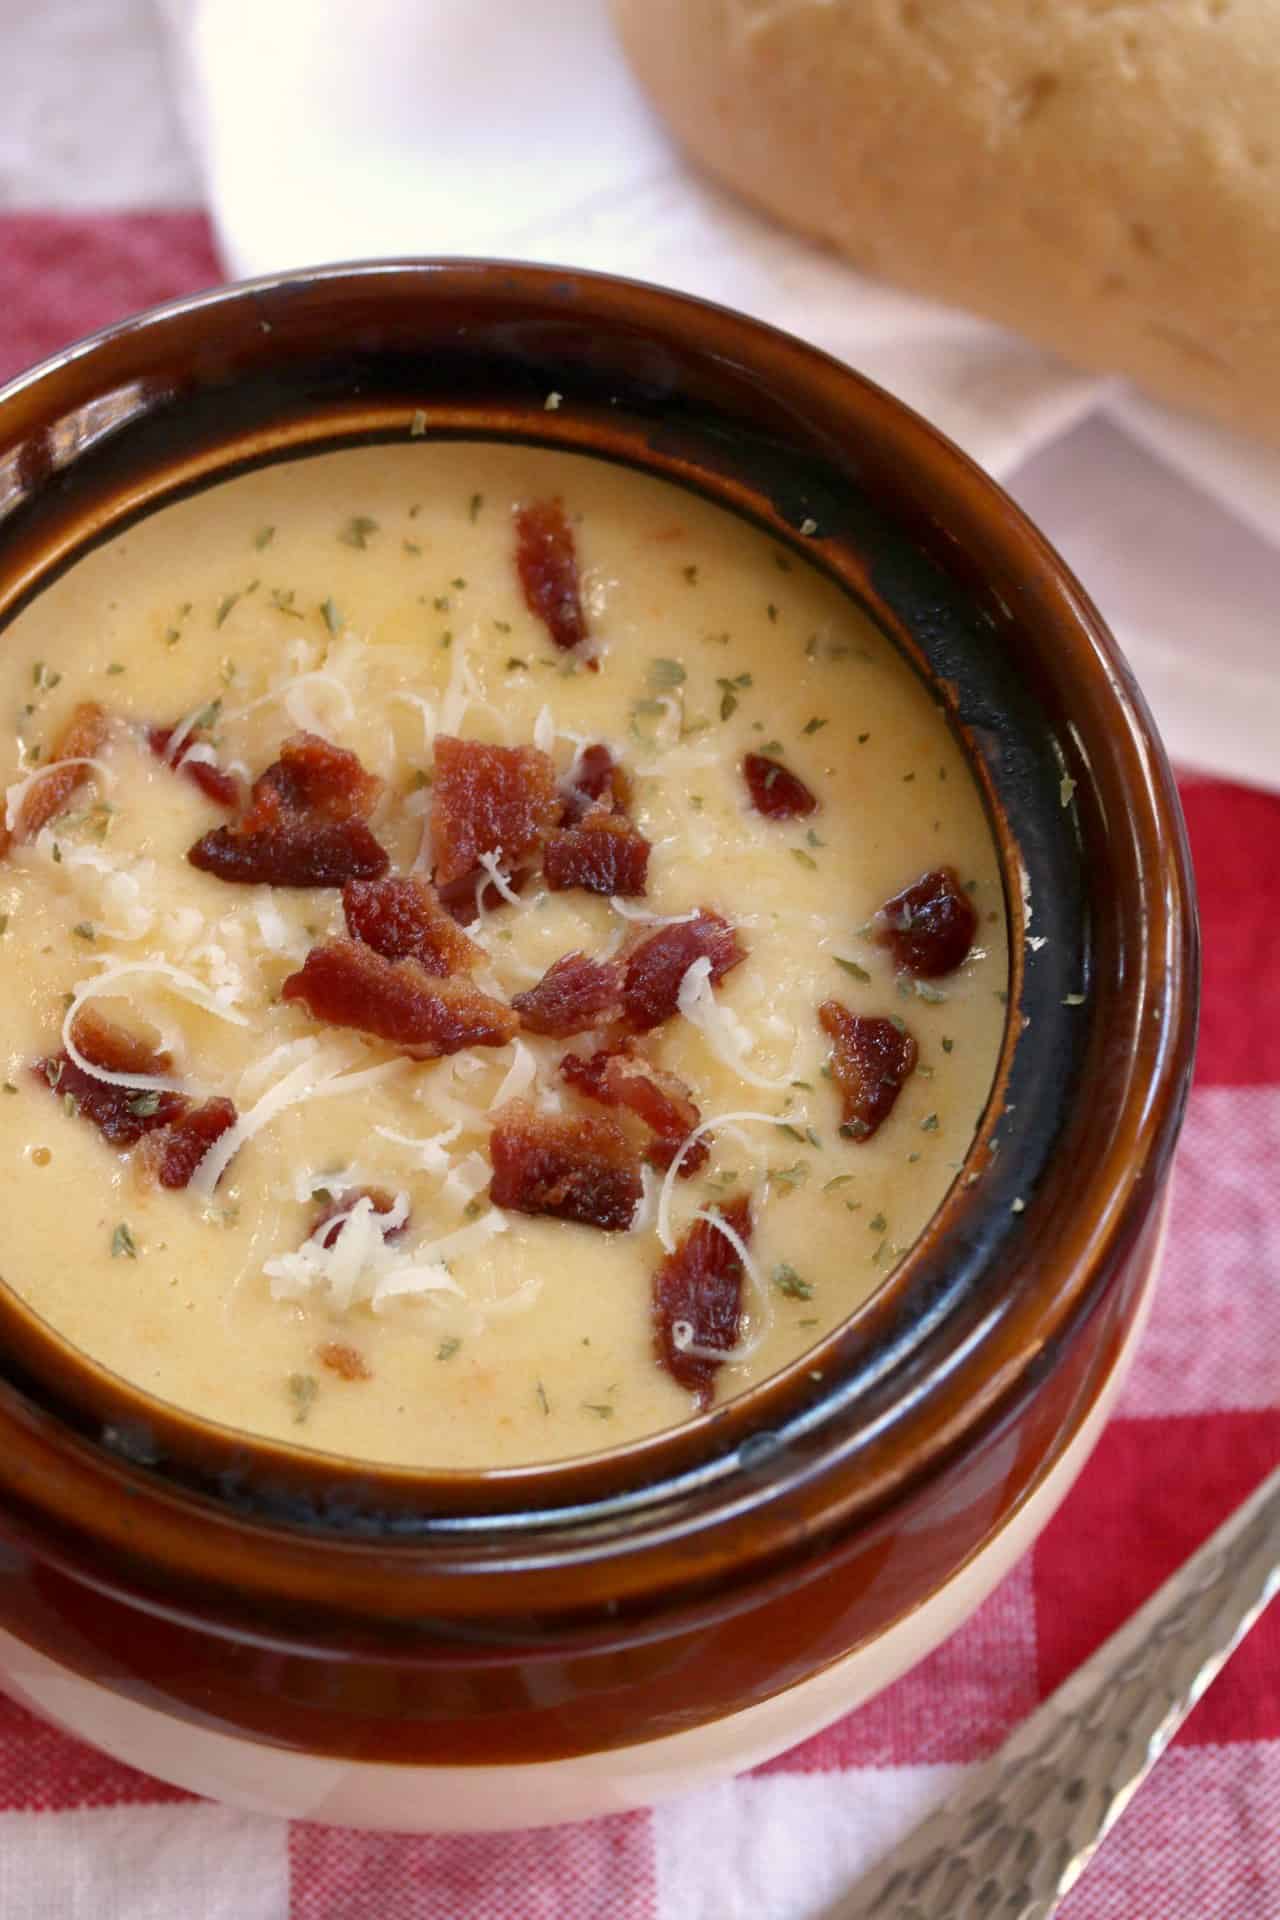 A bowl of Asiago bisque topped with crumbled bacon, parsley, and shredded cheese.